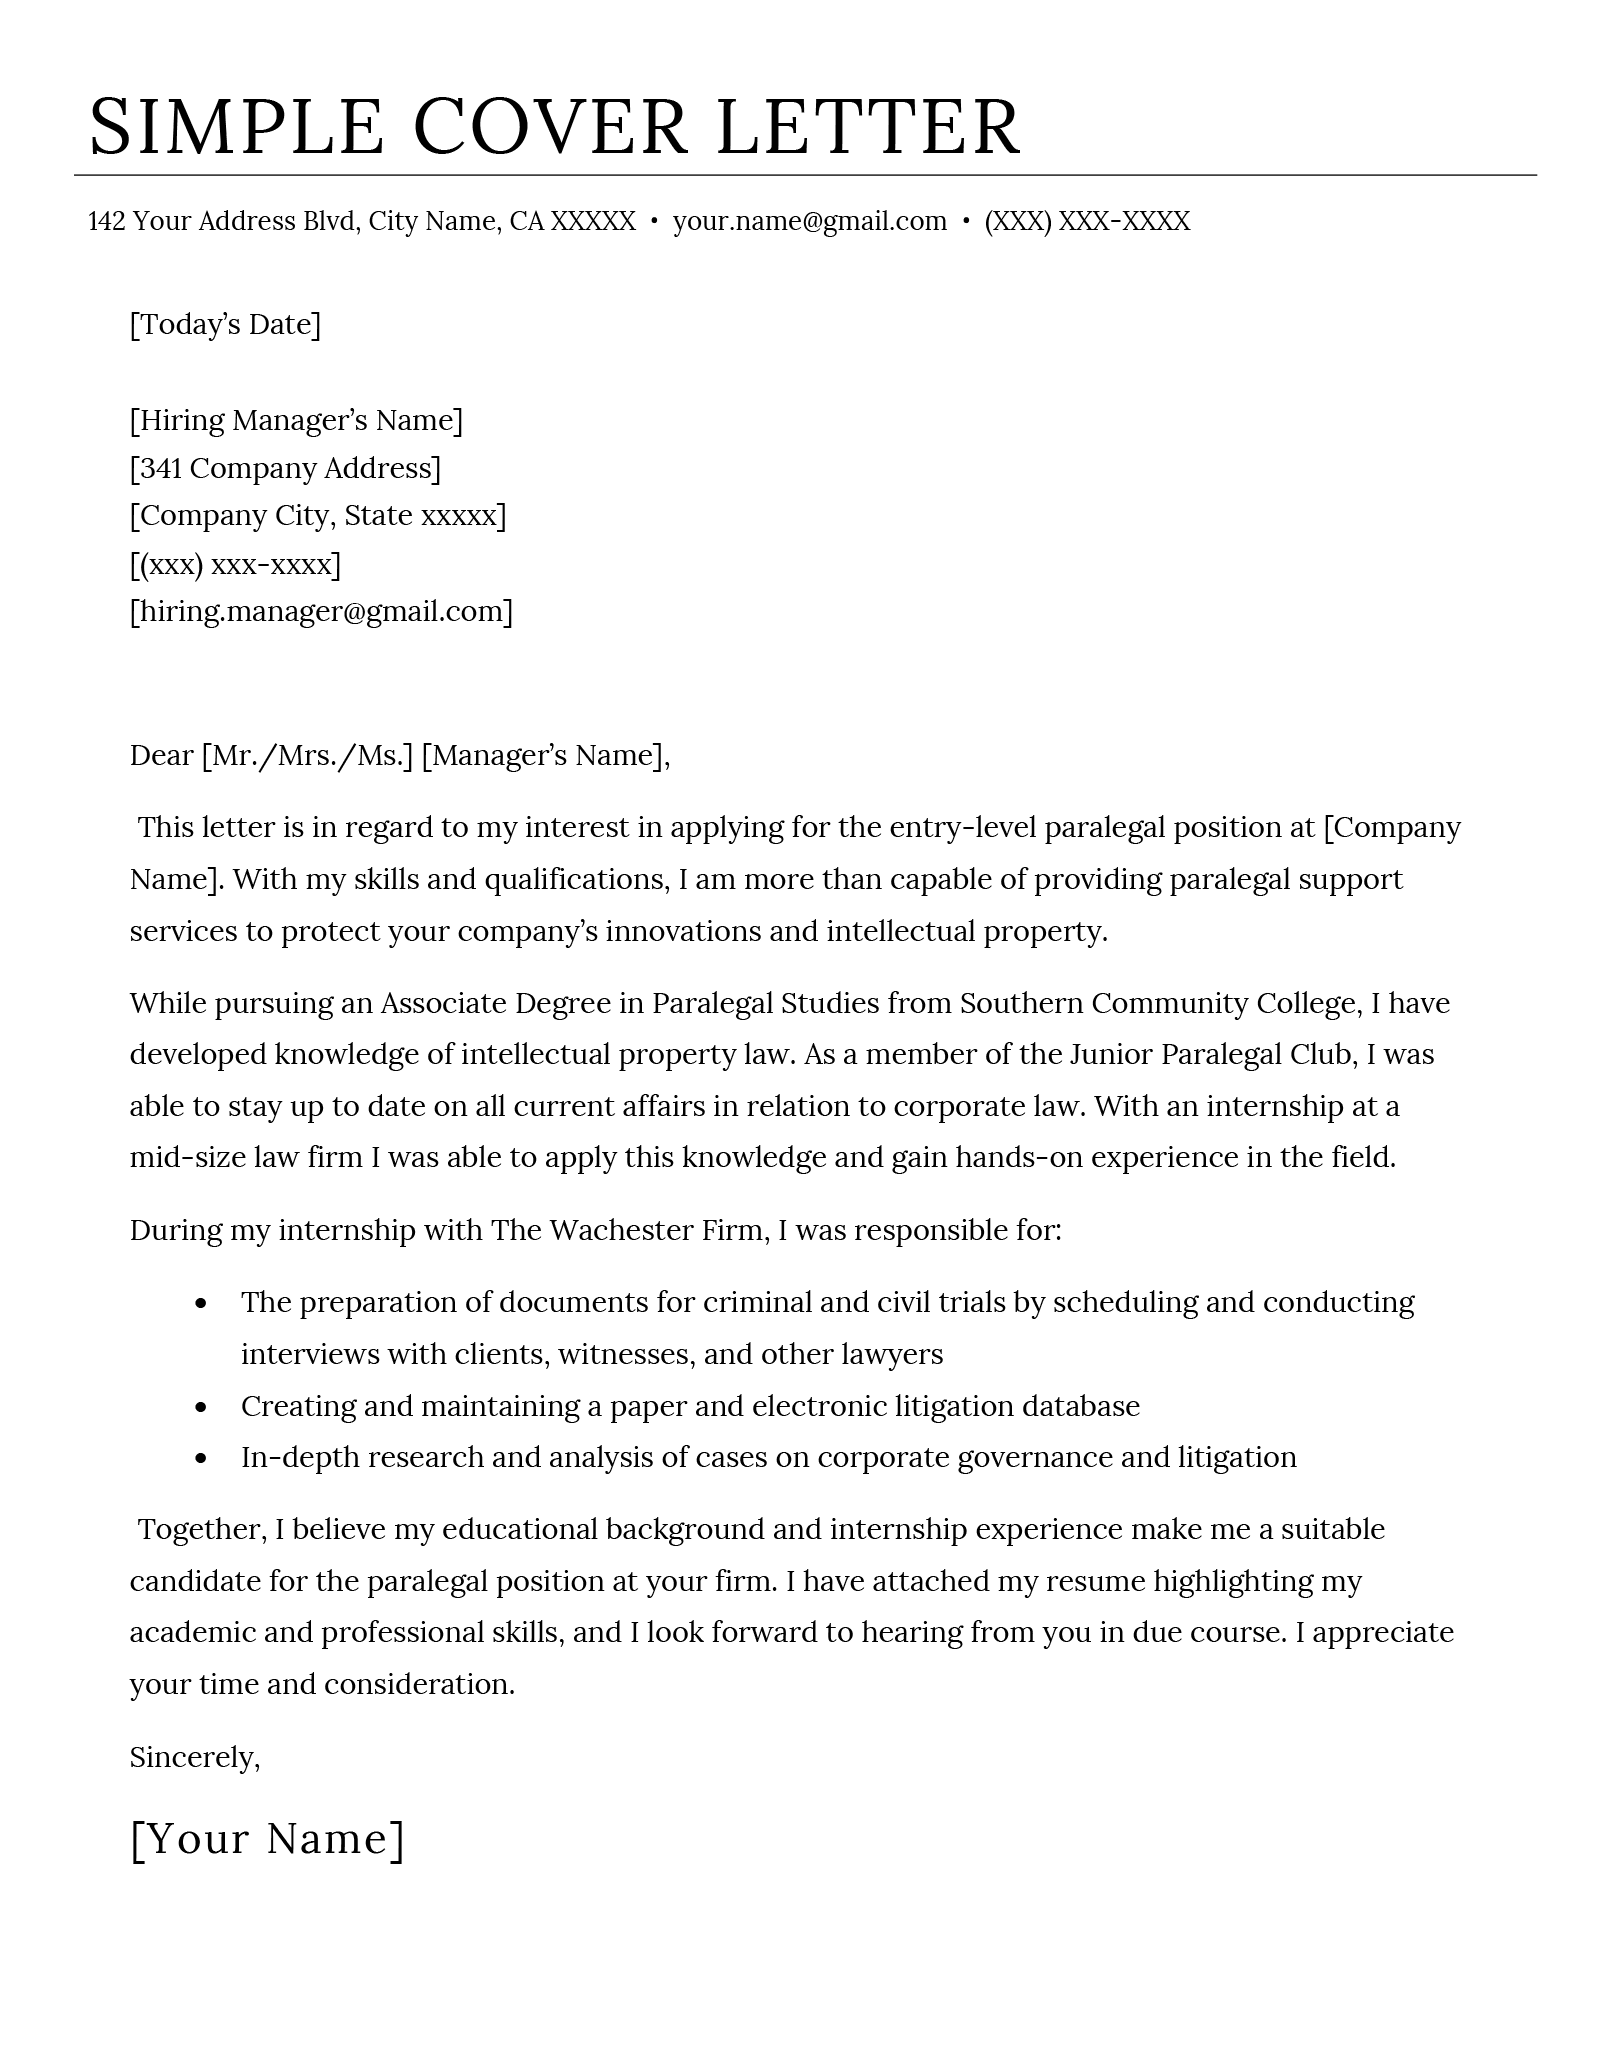 An example of a cover letter using a basic template with simple design features